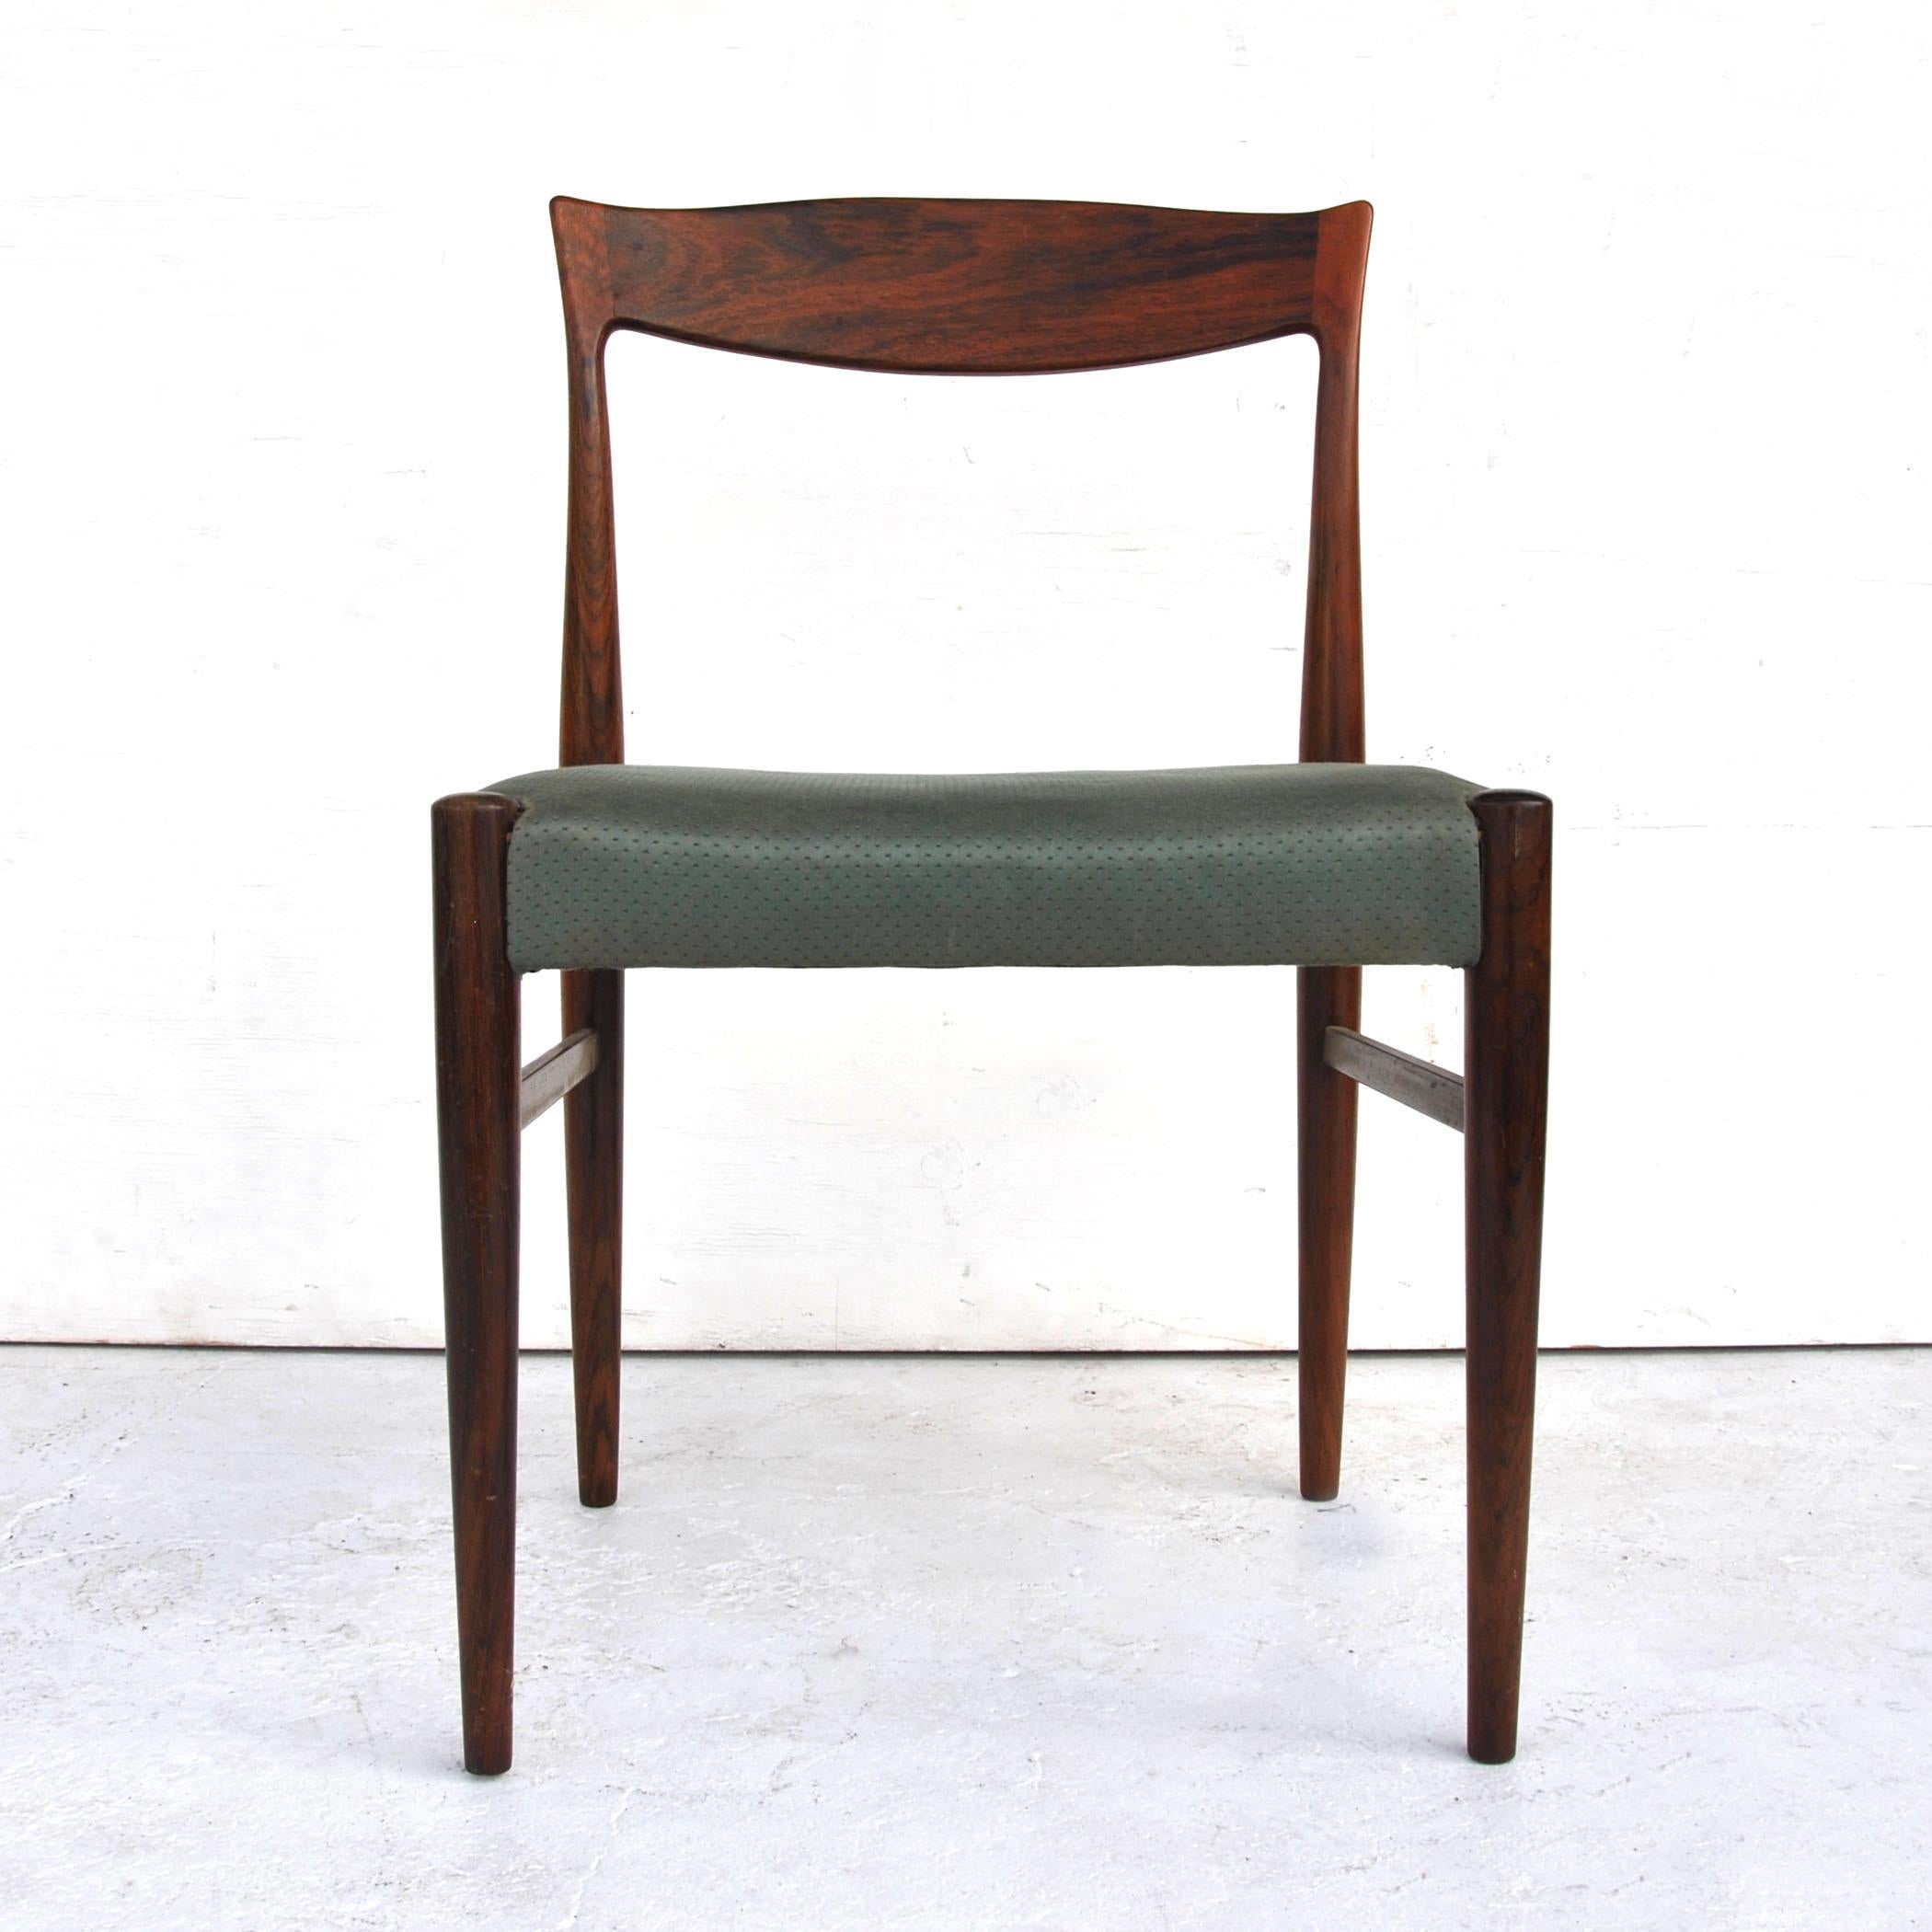 erling torvits chairs